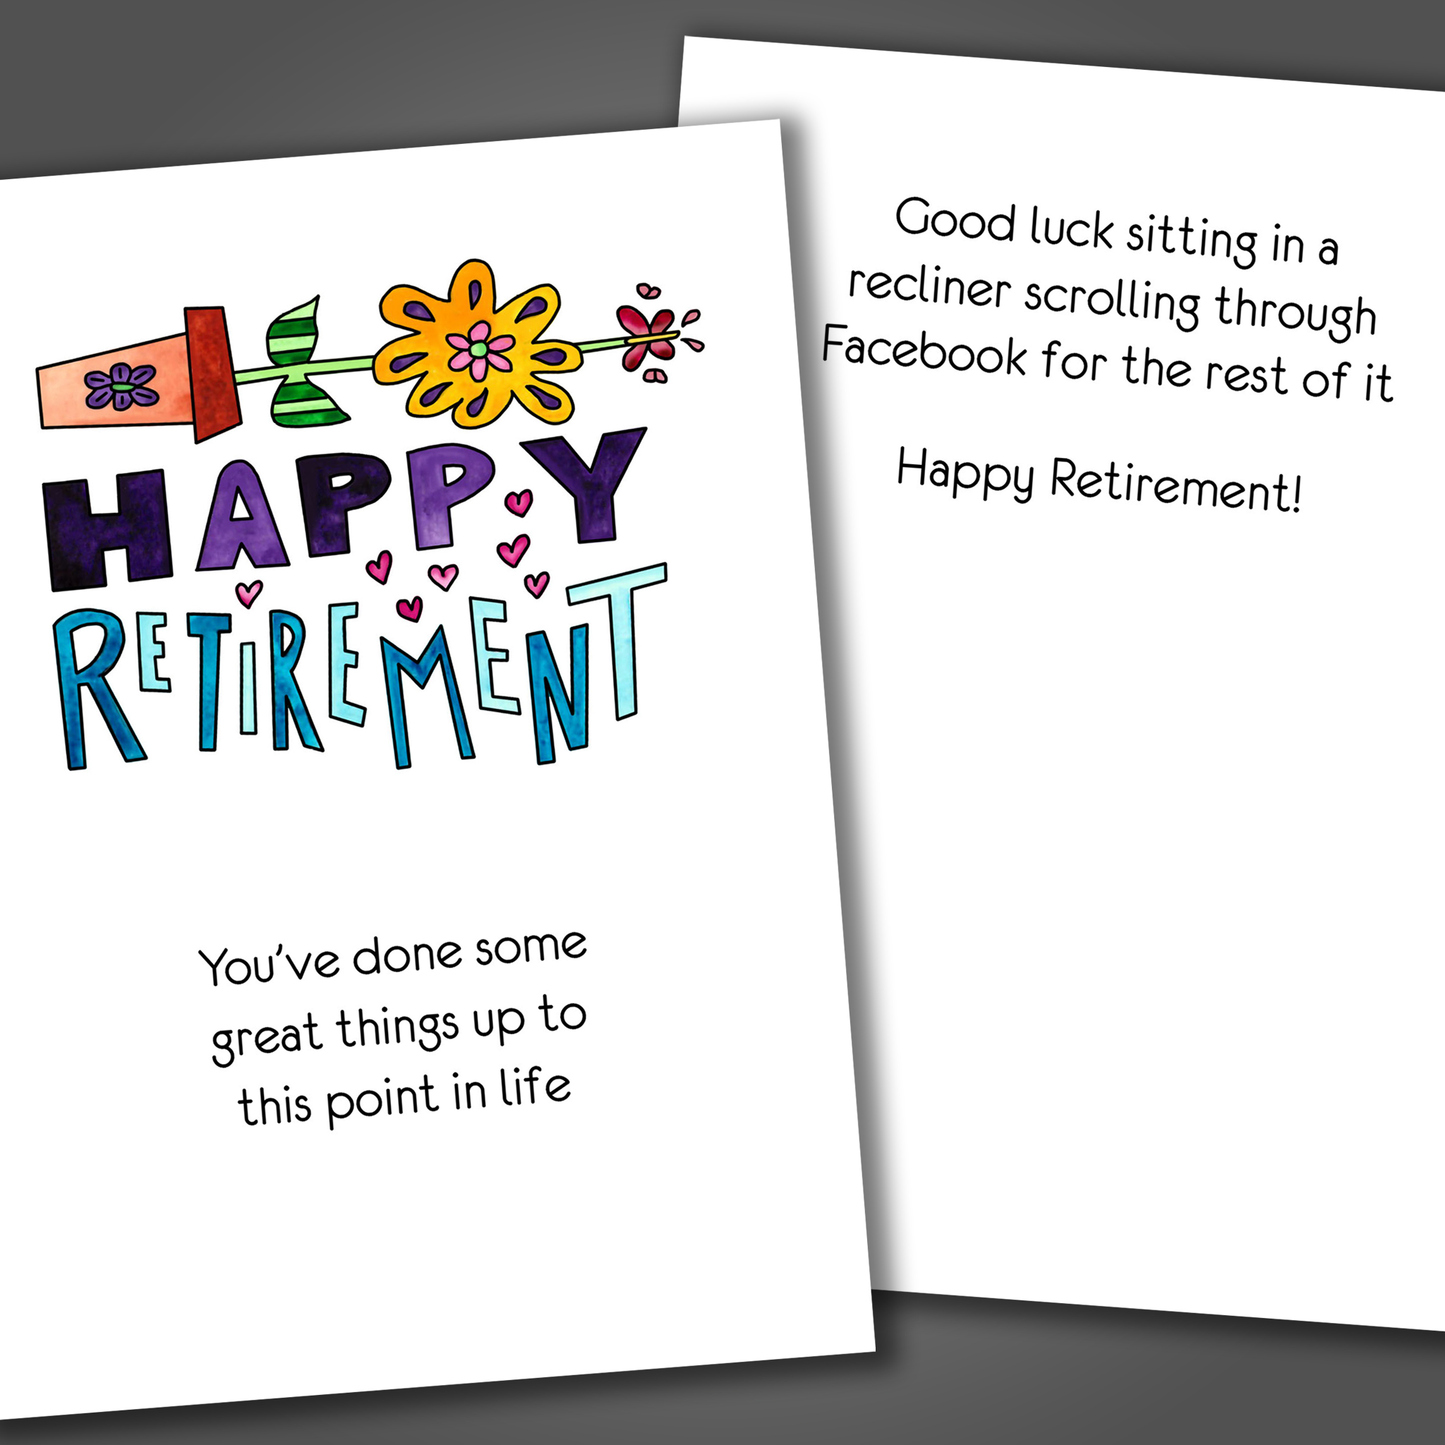 Funny retirement card with yellow flower drawn on the front of card and funny joke inside of card wishing a happy retirement!